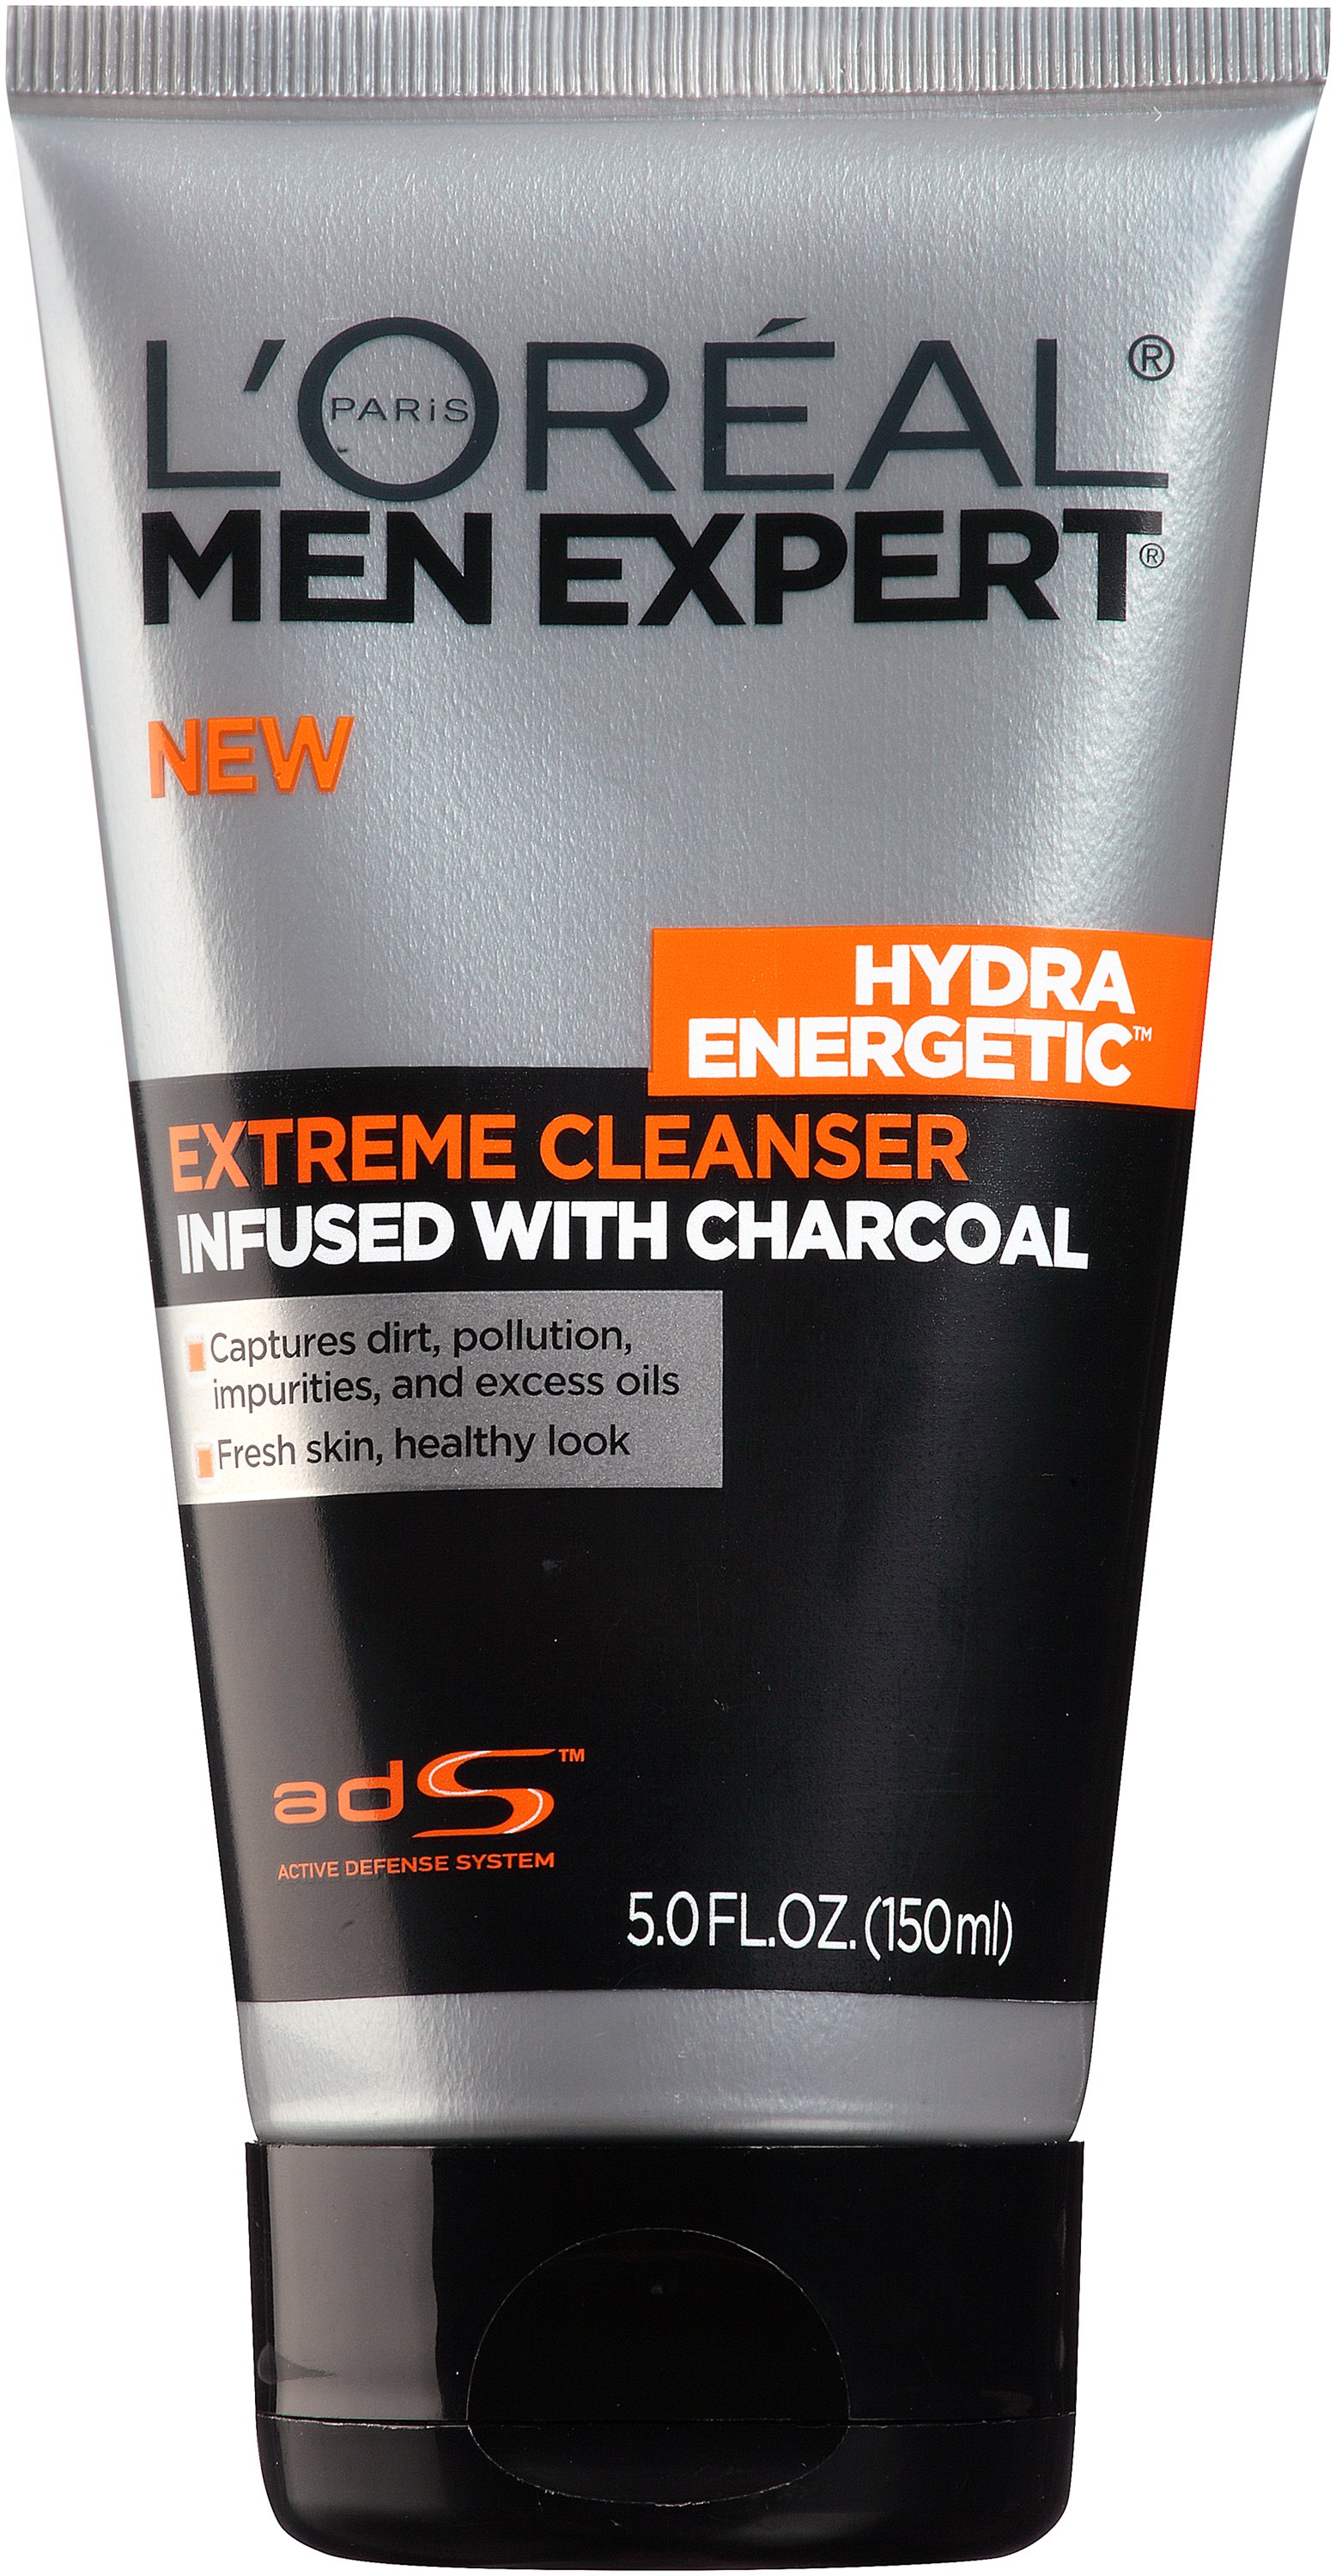 L'Oréal Paris Men Expert Hydra Energetic Extreme Cleanser Infused Charcoal - Bath & Skin Care at H-E-B